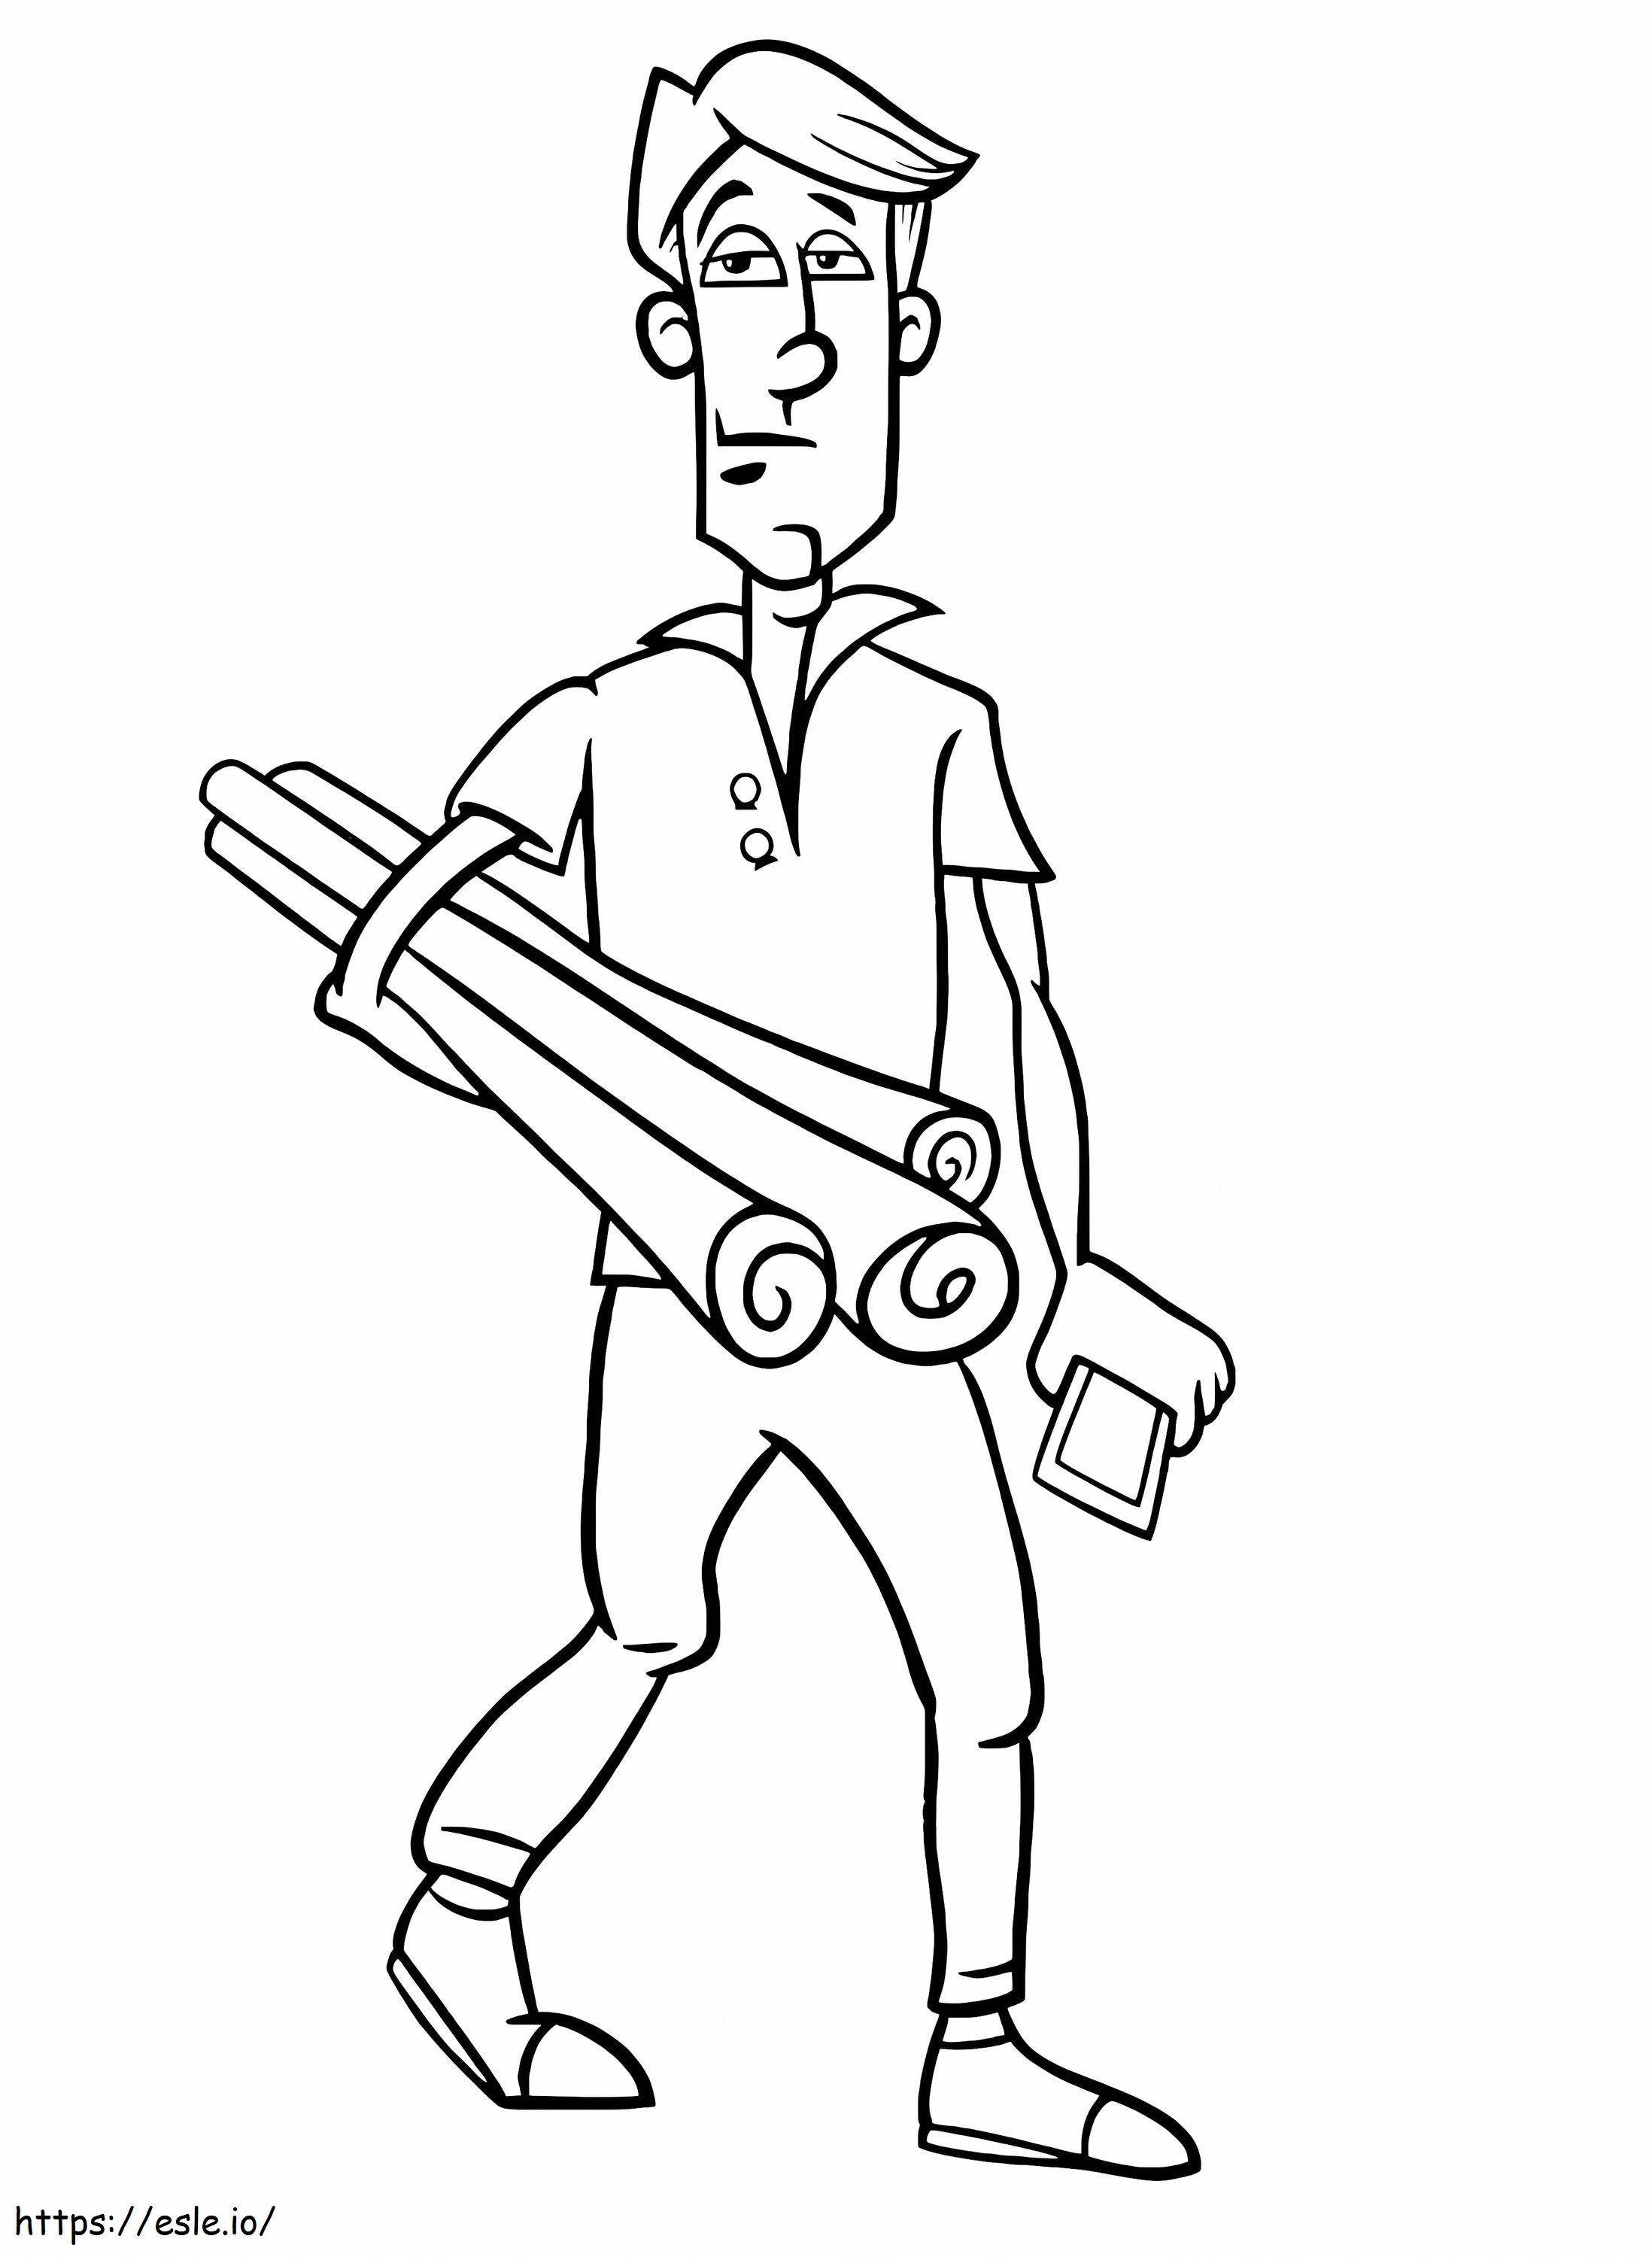 Engineer 5 coloring page